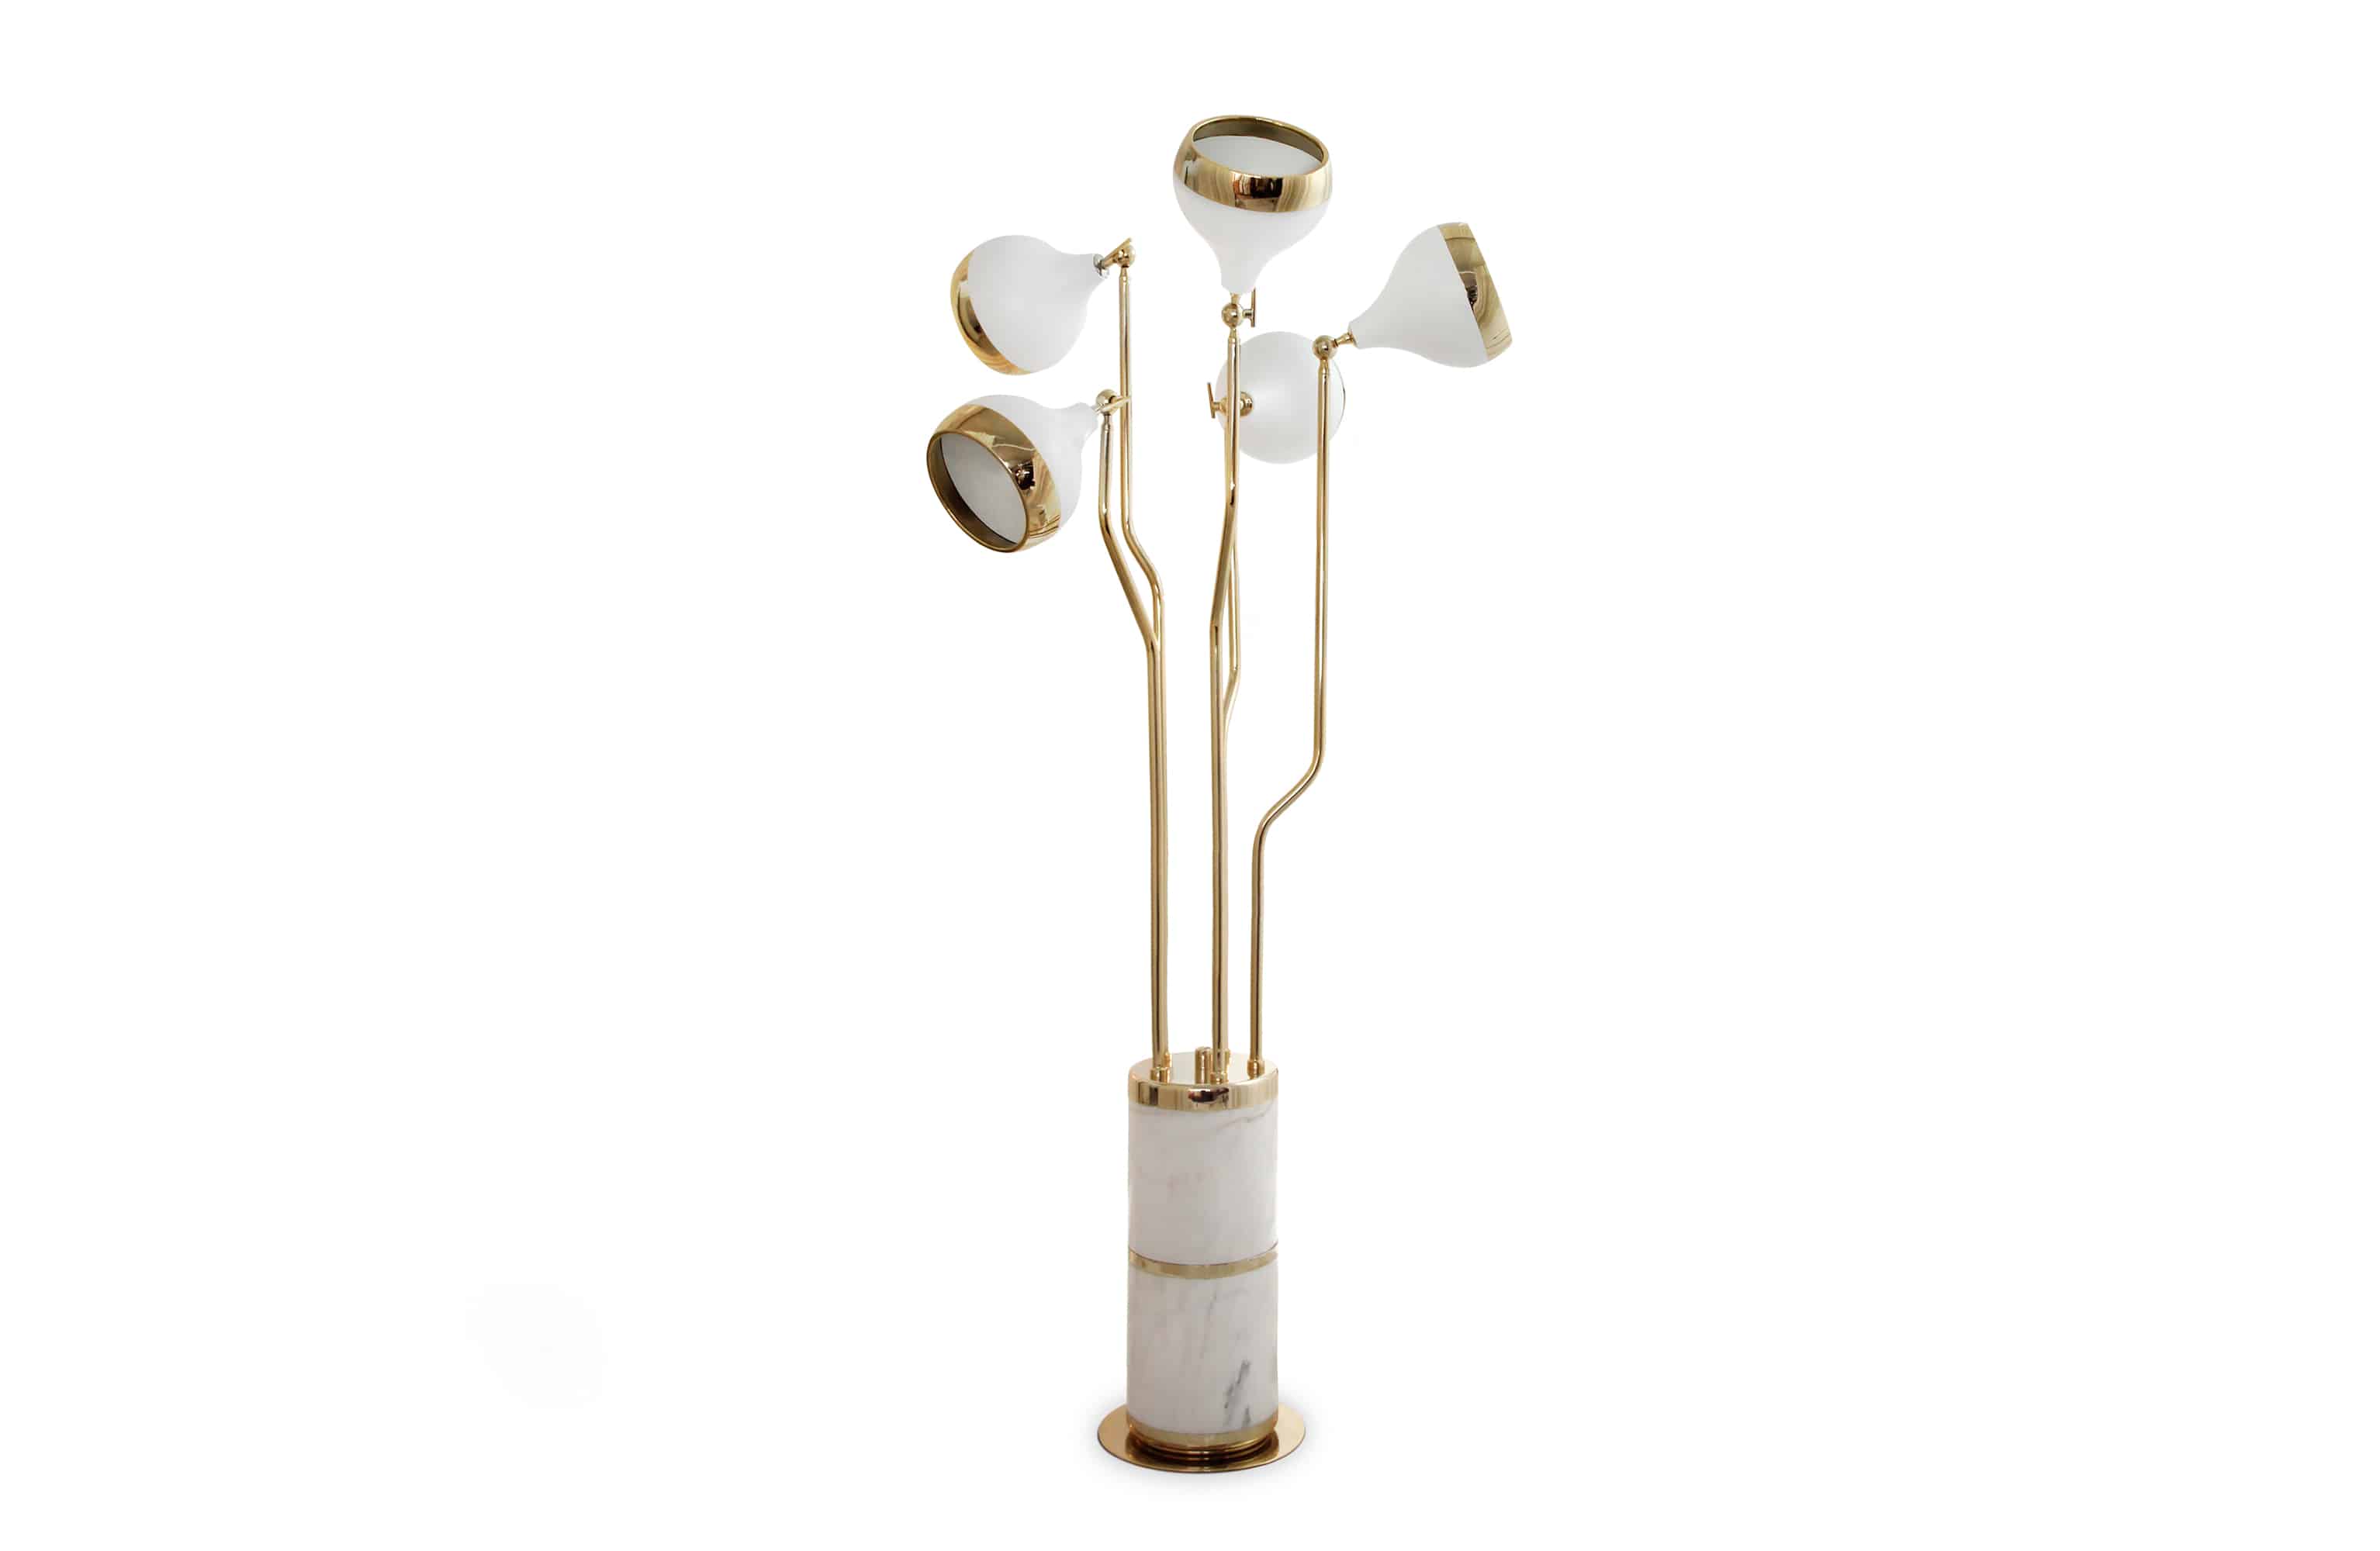 marble and gold floor lamp